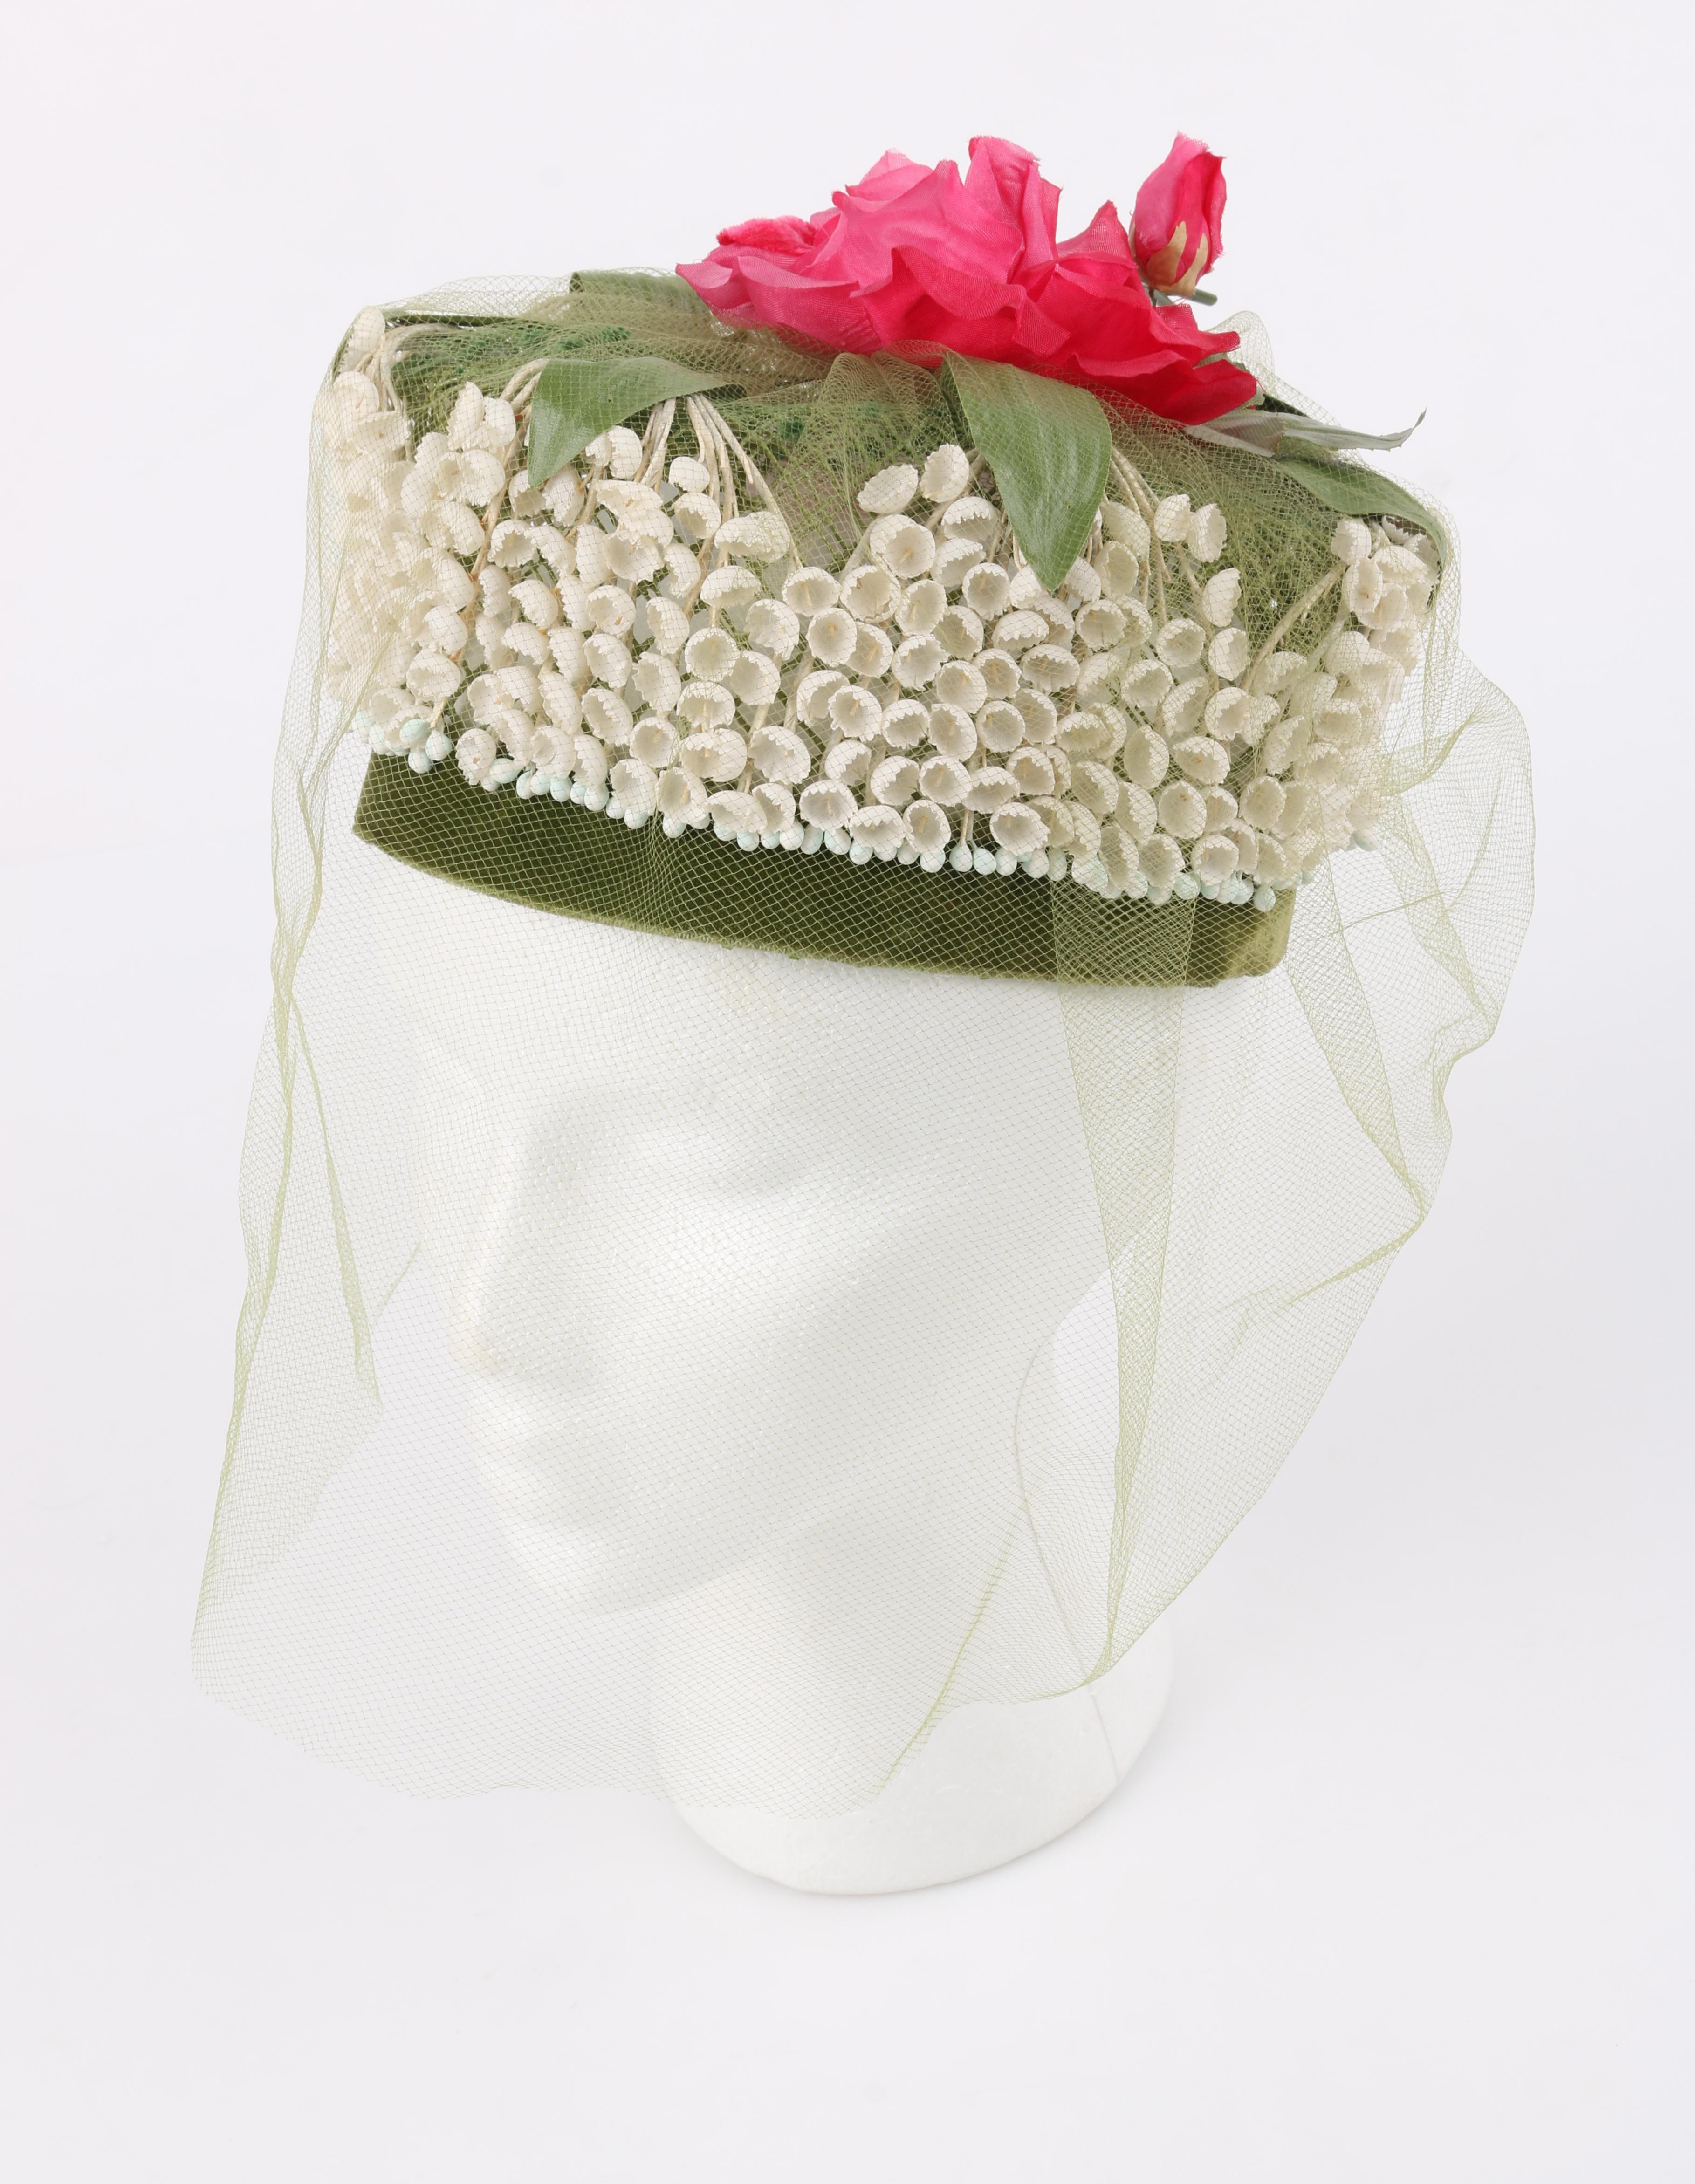 Beige MISS FEIGE c.1960's Lily of the Valley Veiled Floral Garden Party Pillbox Hat